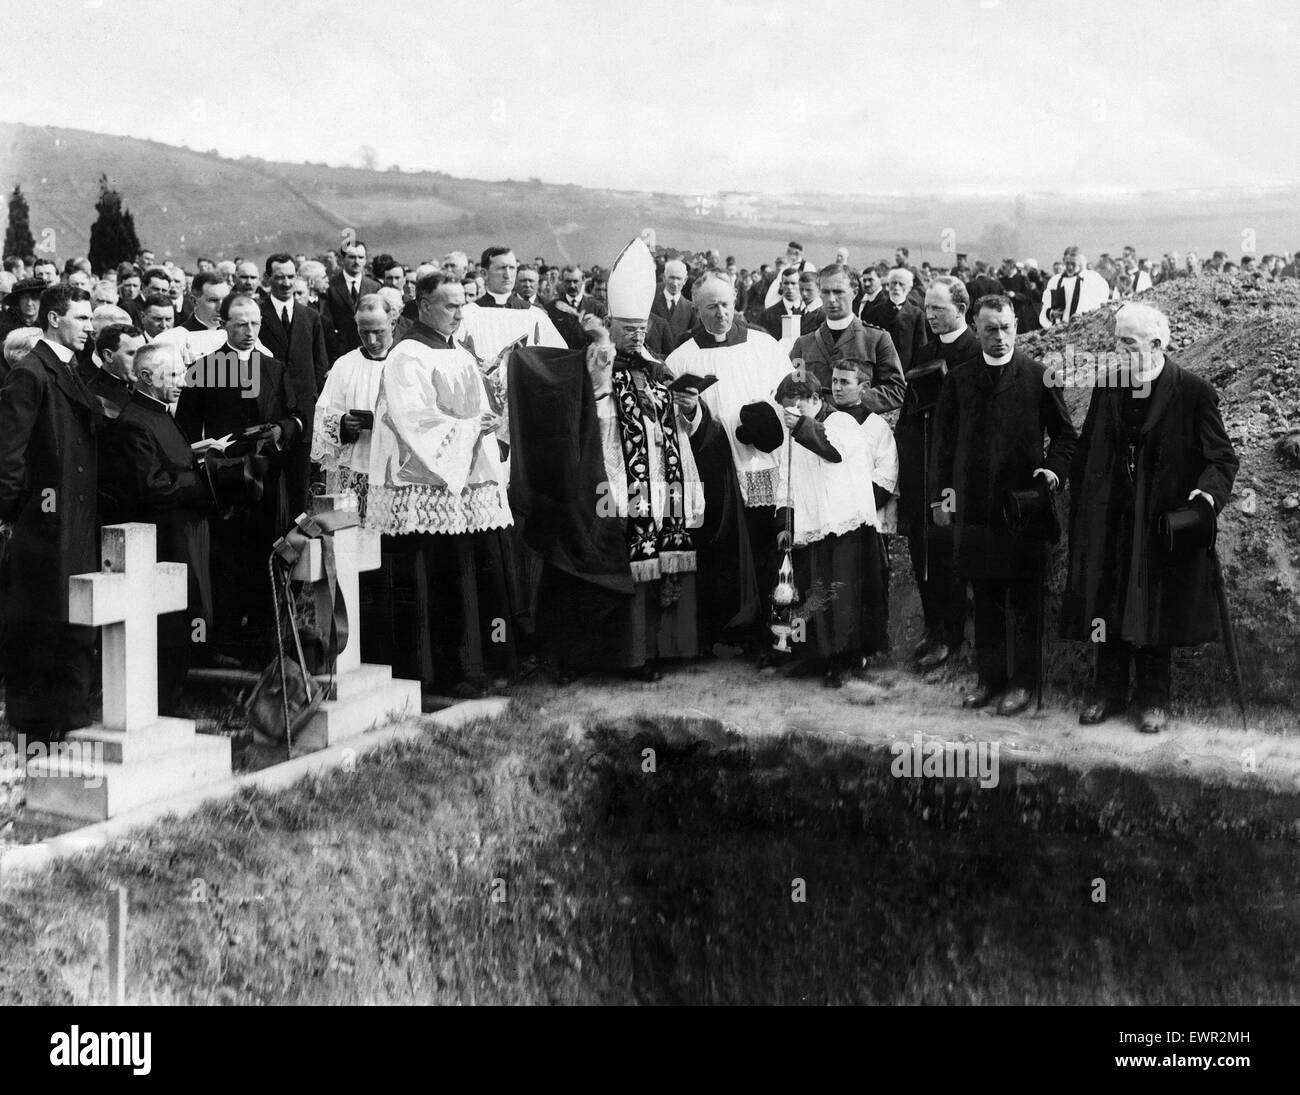 RMS Lusitania, ocean liner, owned by the Cunard Line, was torpedoed by German U-boat on Friday 7th May 1915. Our picture shows, murdered passengers are laid to rest, Old Church Cemetery of Queenstown, a seaport town on the south coast of County Cork, Irel Stock Photo